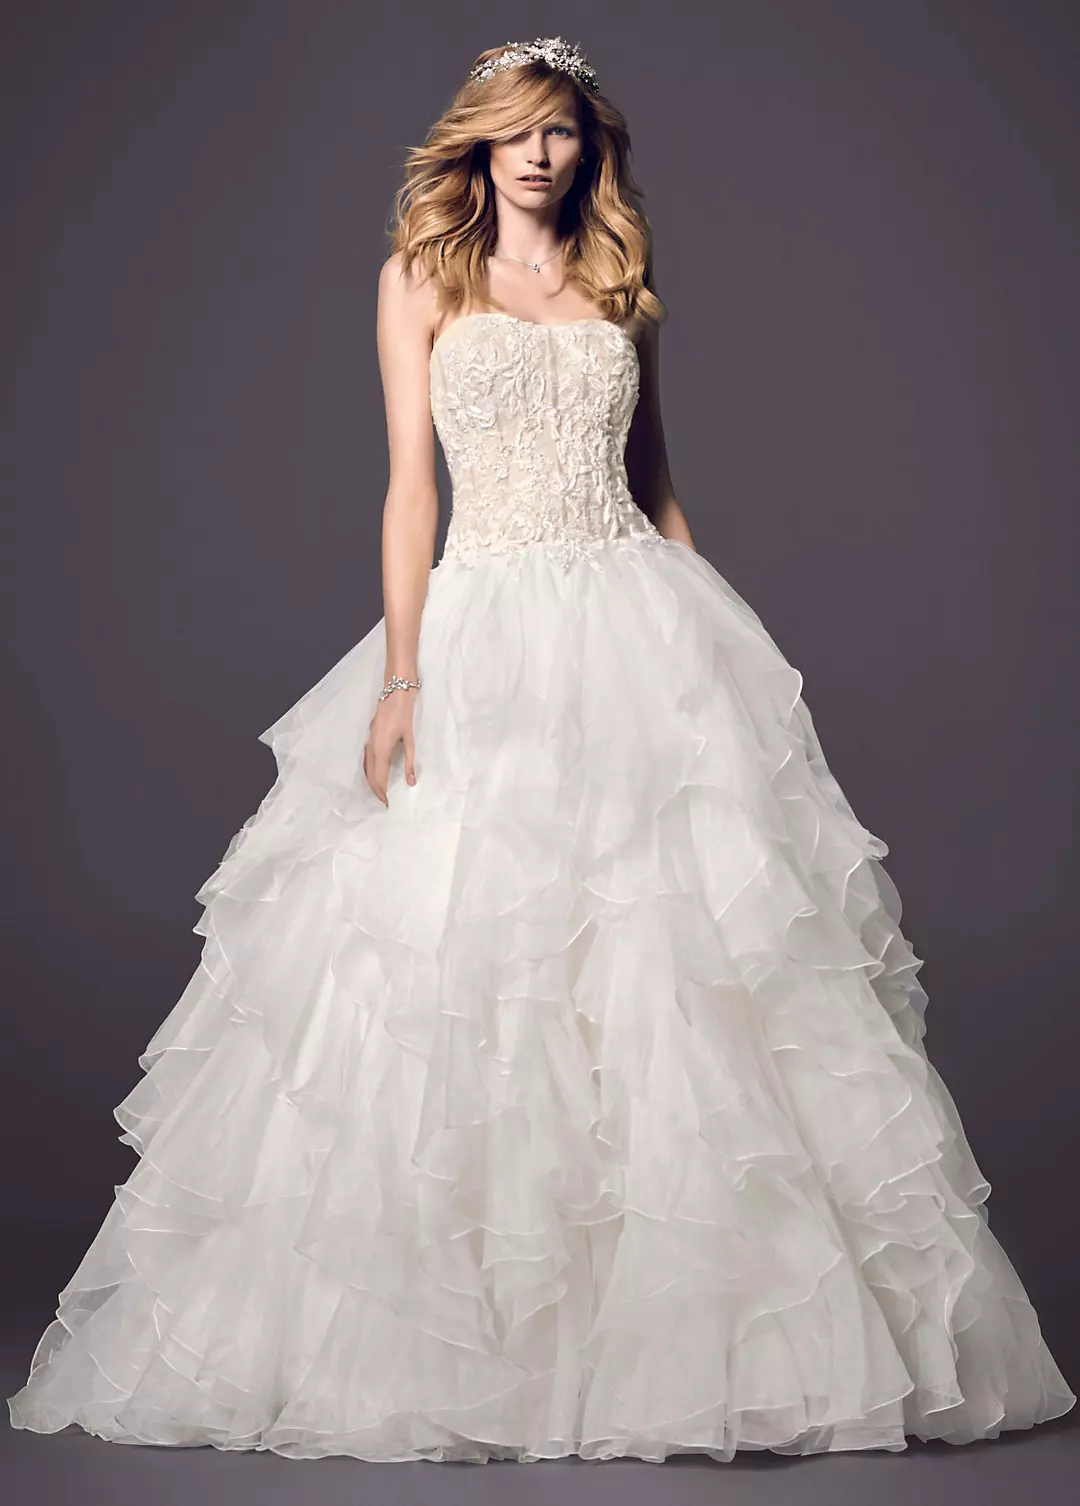 Strapless Ball Gown with Organza Ruffle Skirt Image